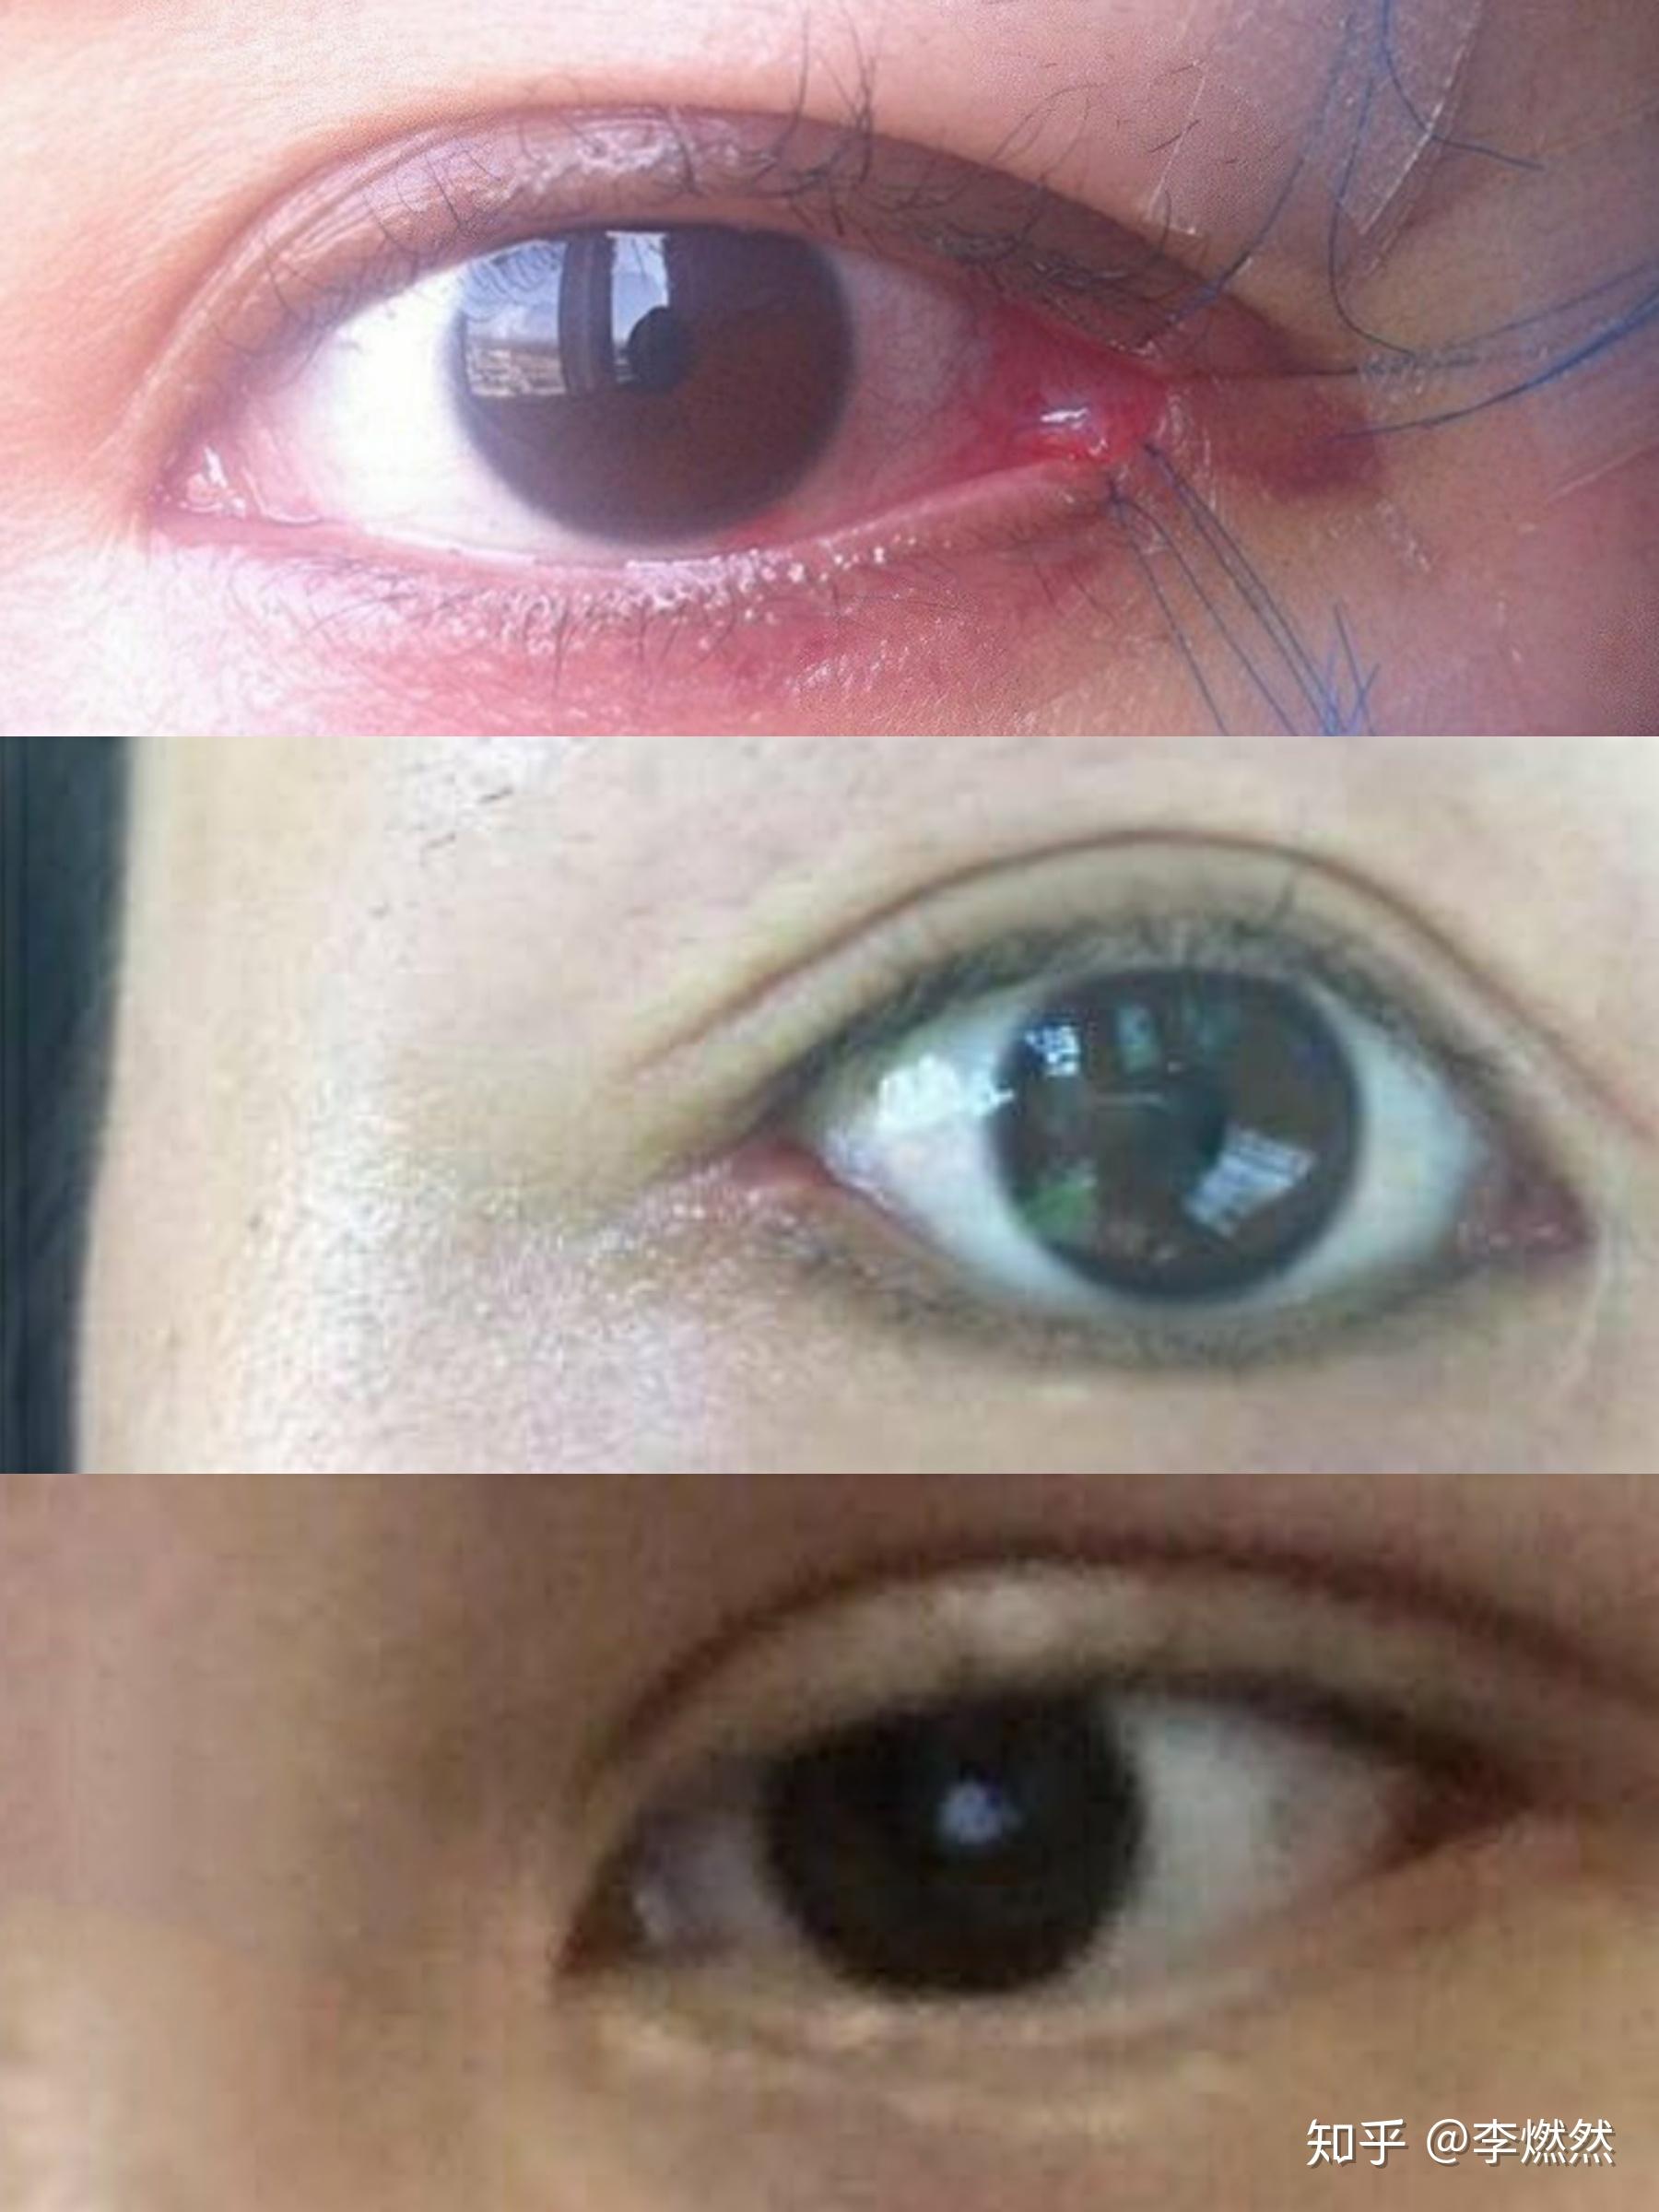 Red spot on eye: Causes and treatment